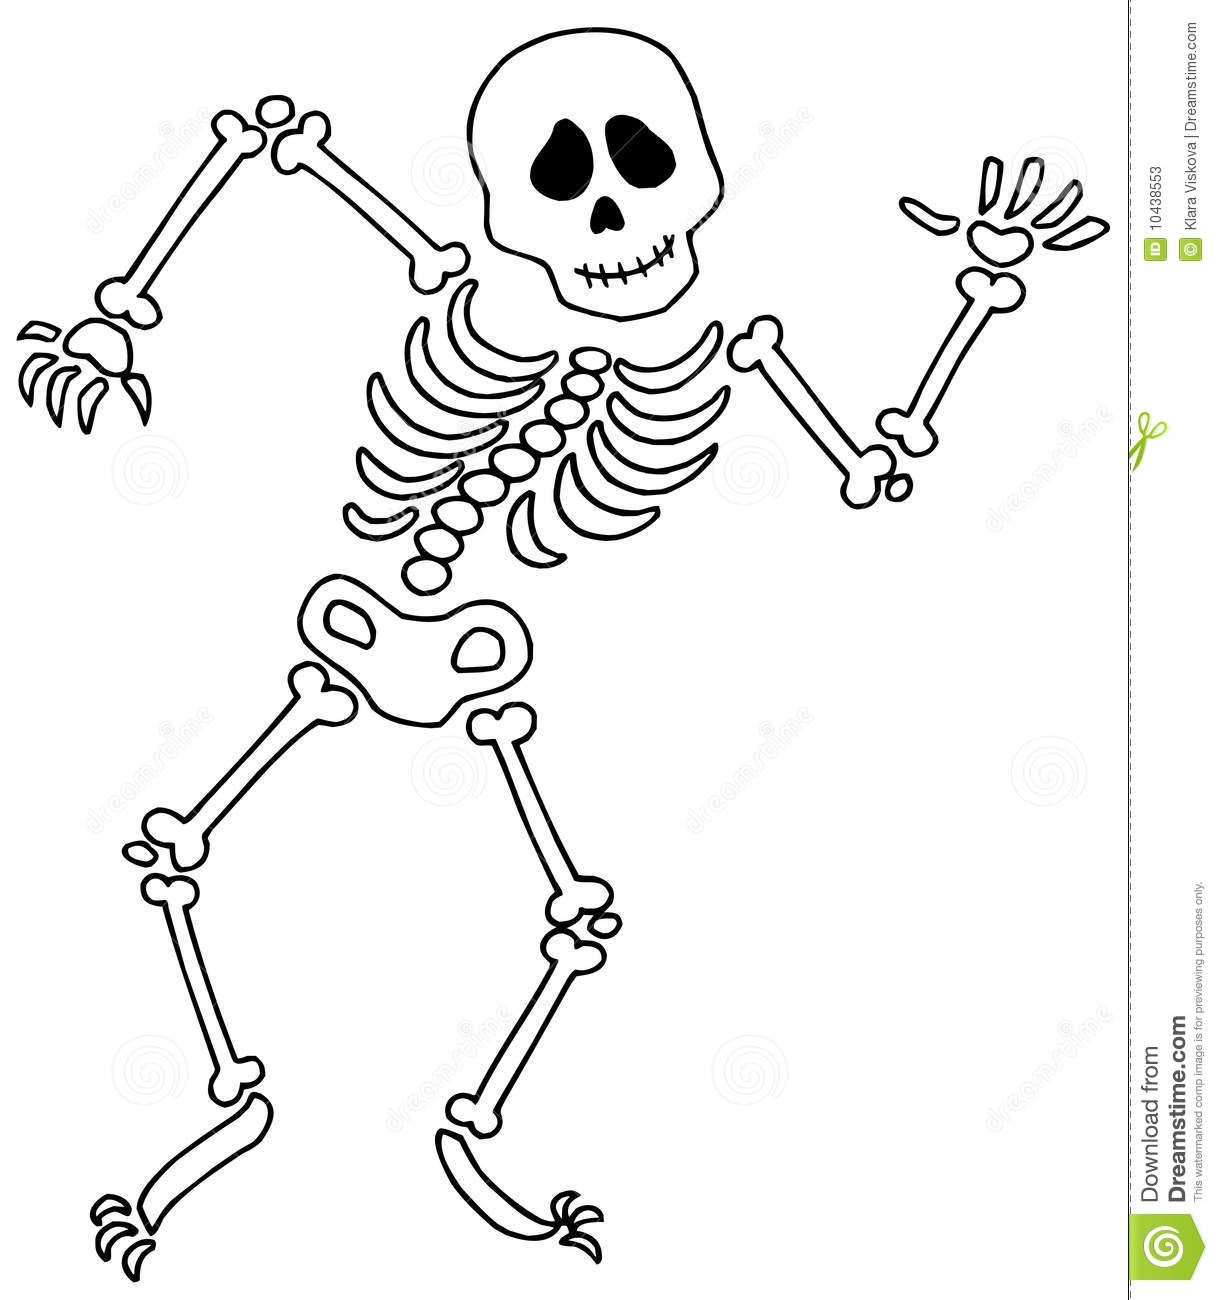 Skeletons, Clip art and .